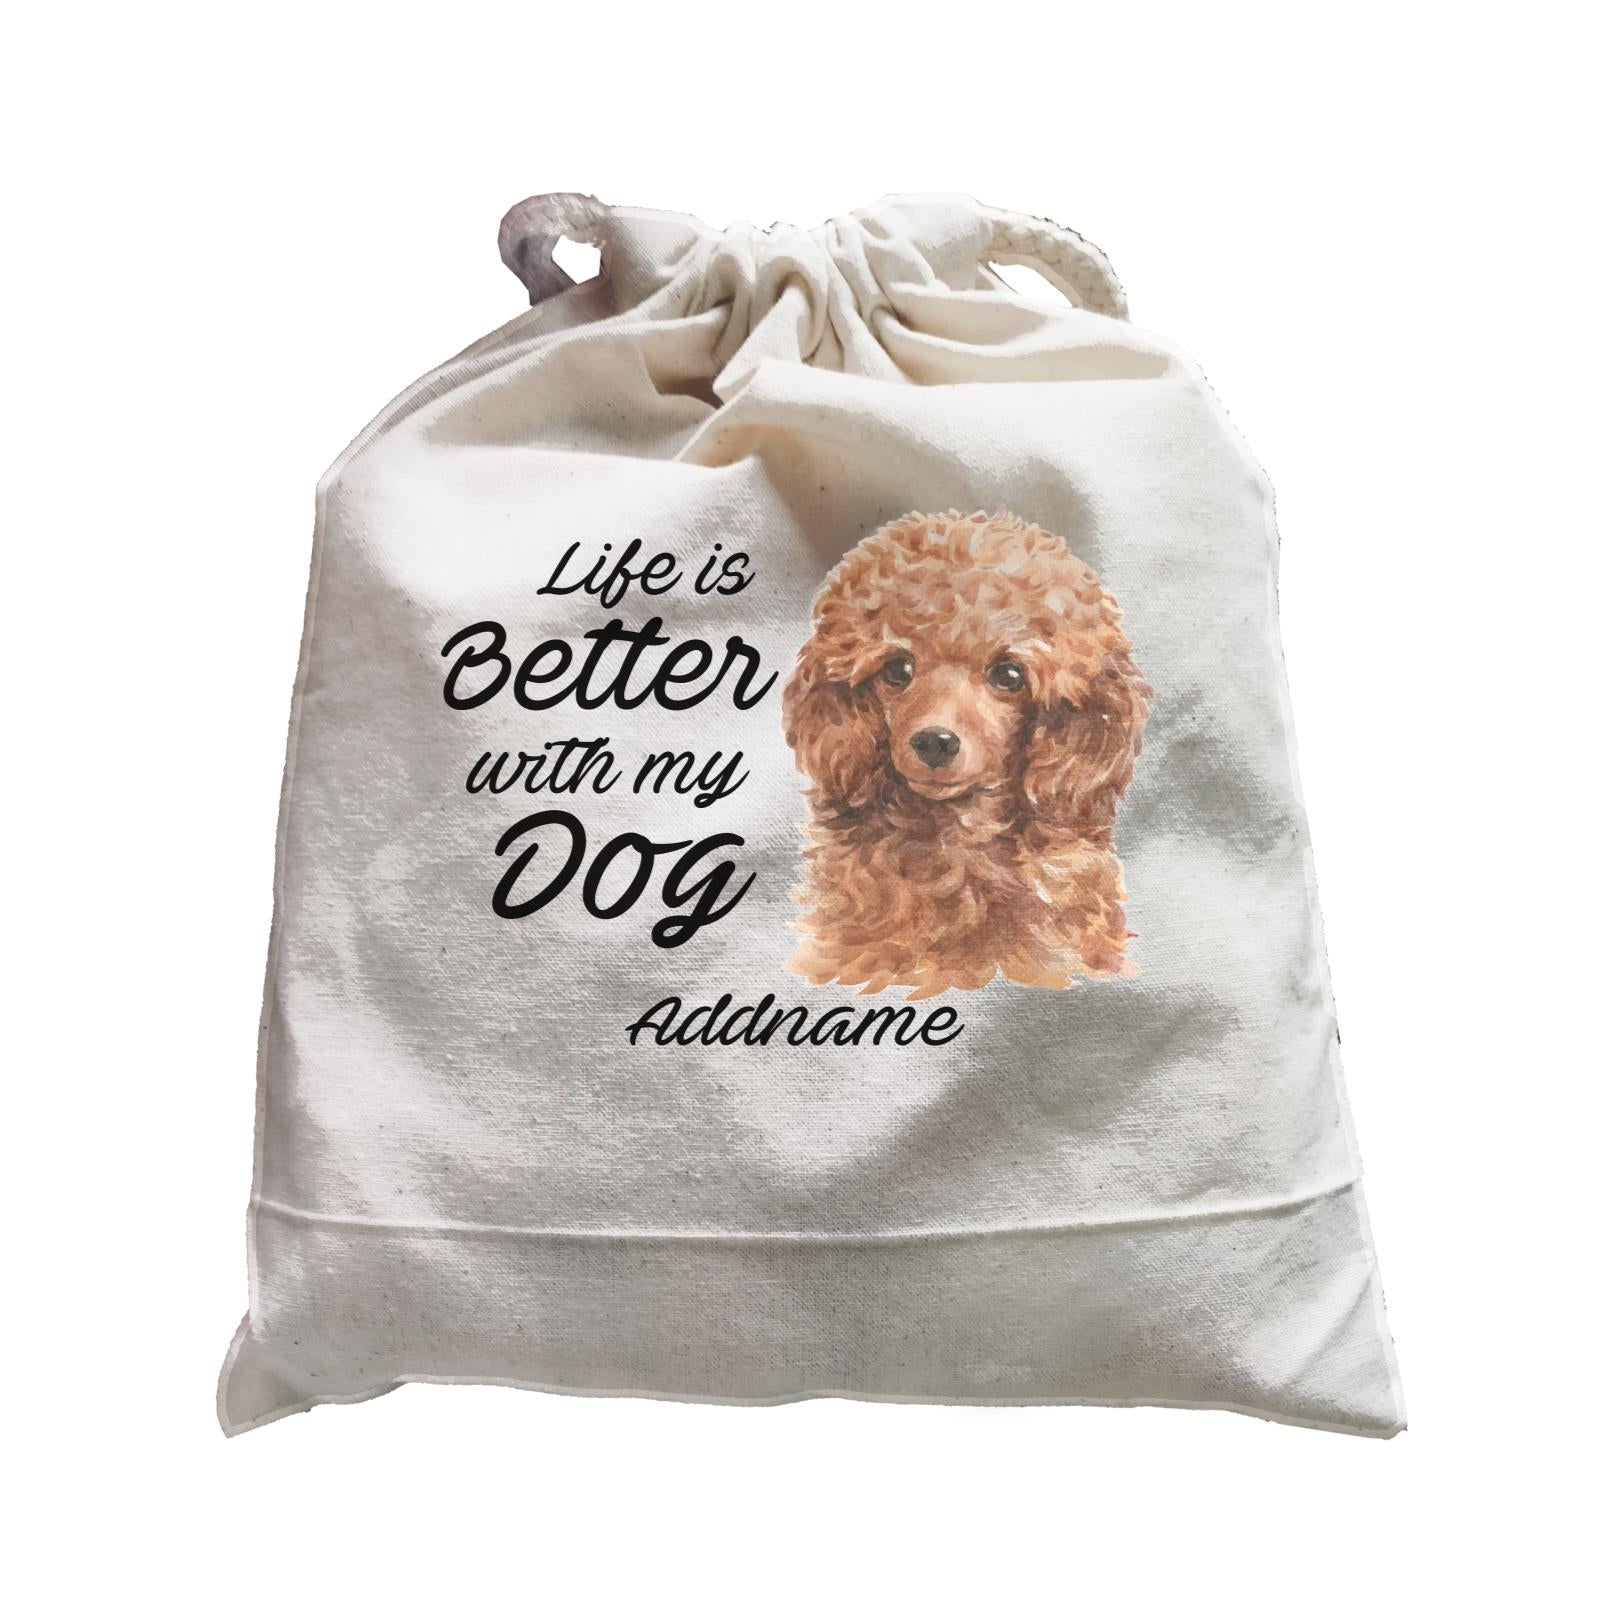 Watercolor Life is Better With My Dog Poodle Brown Addname Satchel